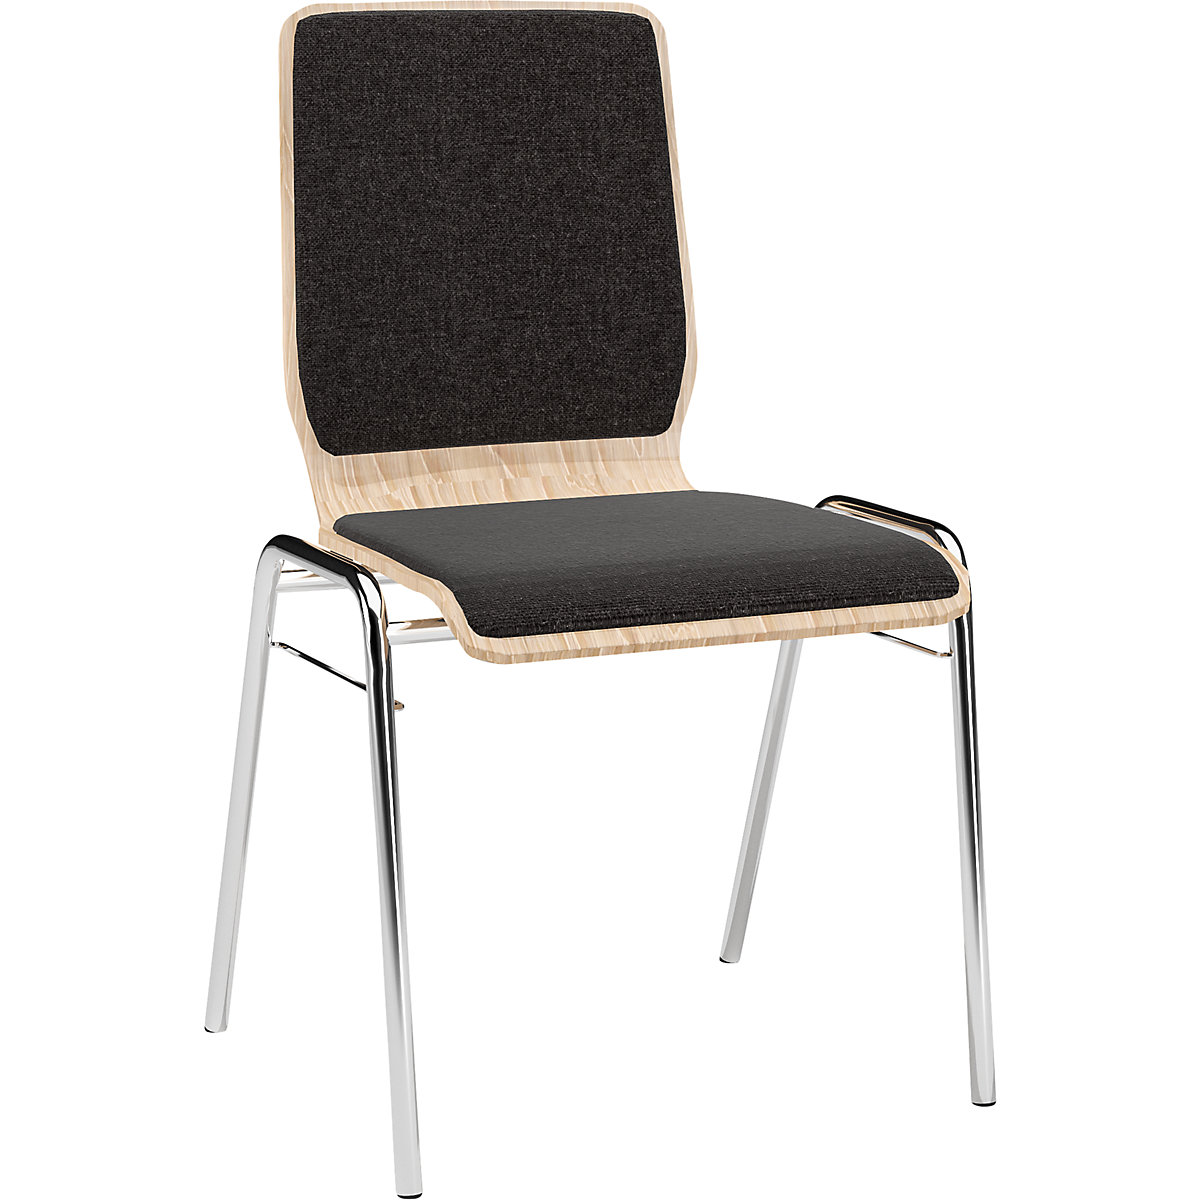 NUKI wooden stacking chair, upholstered